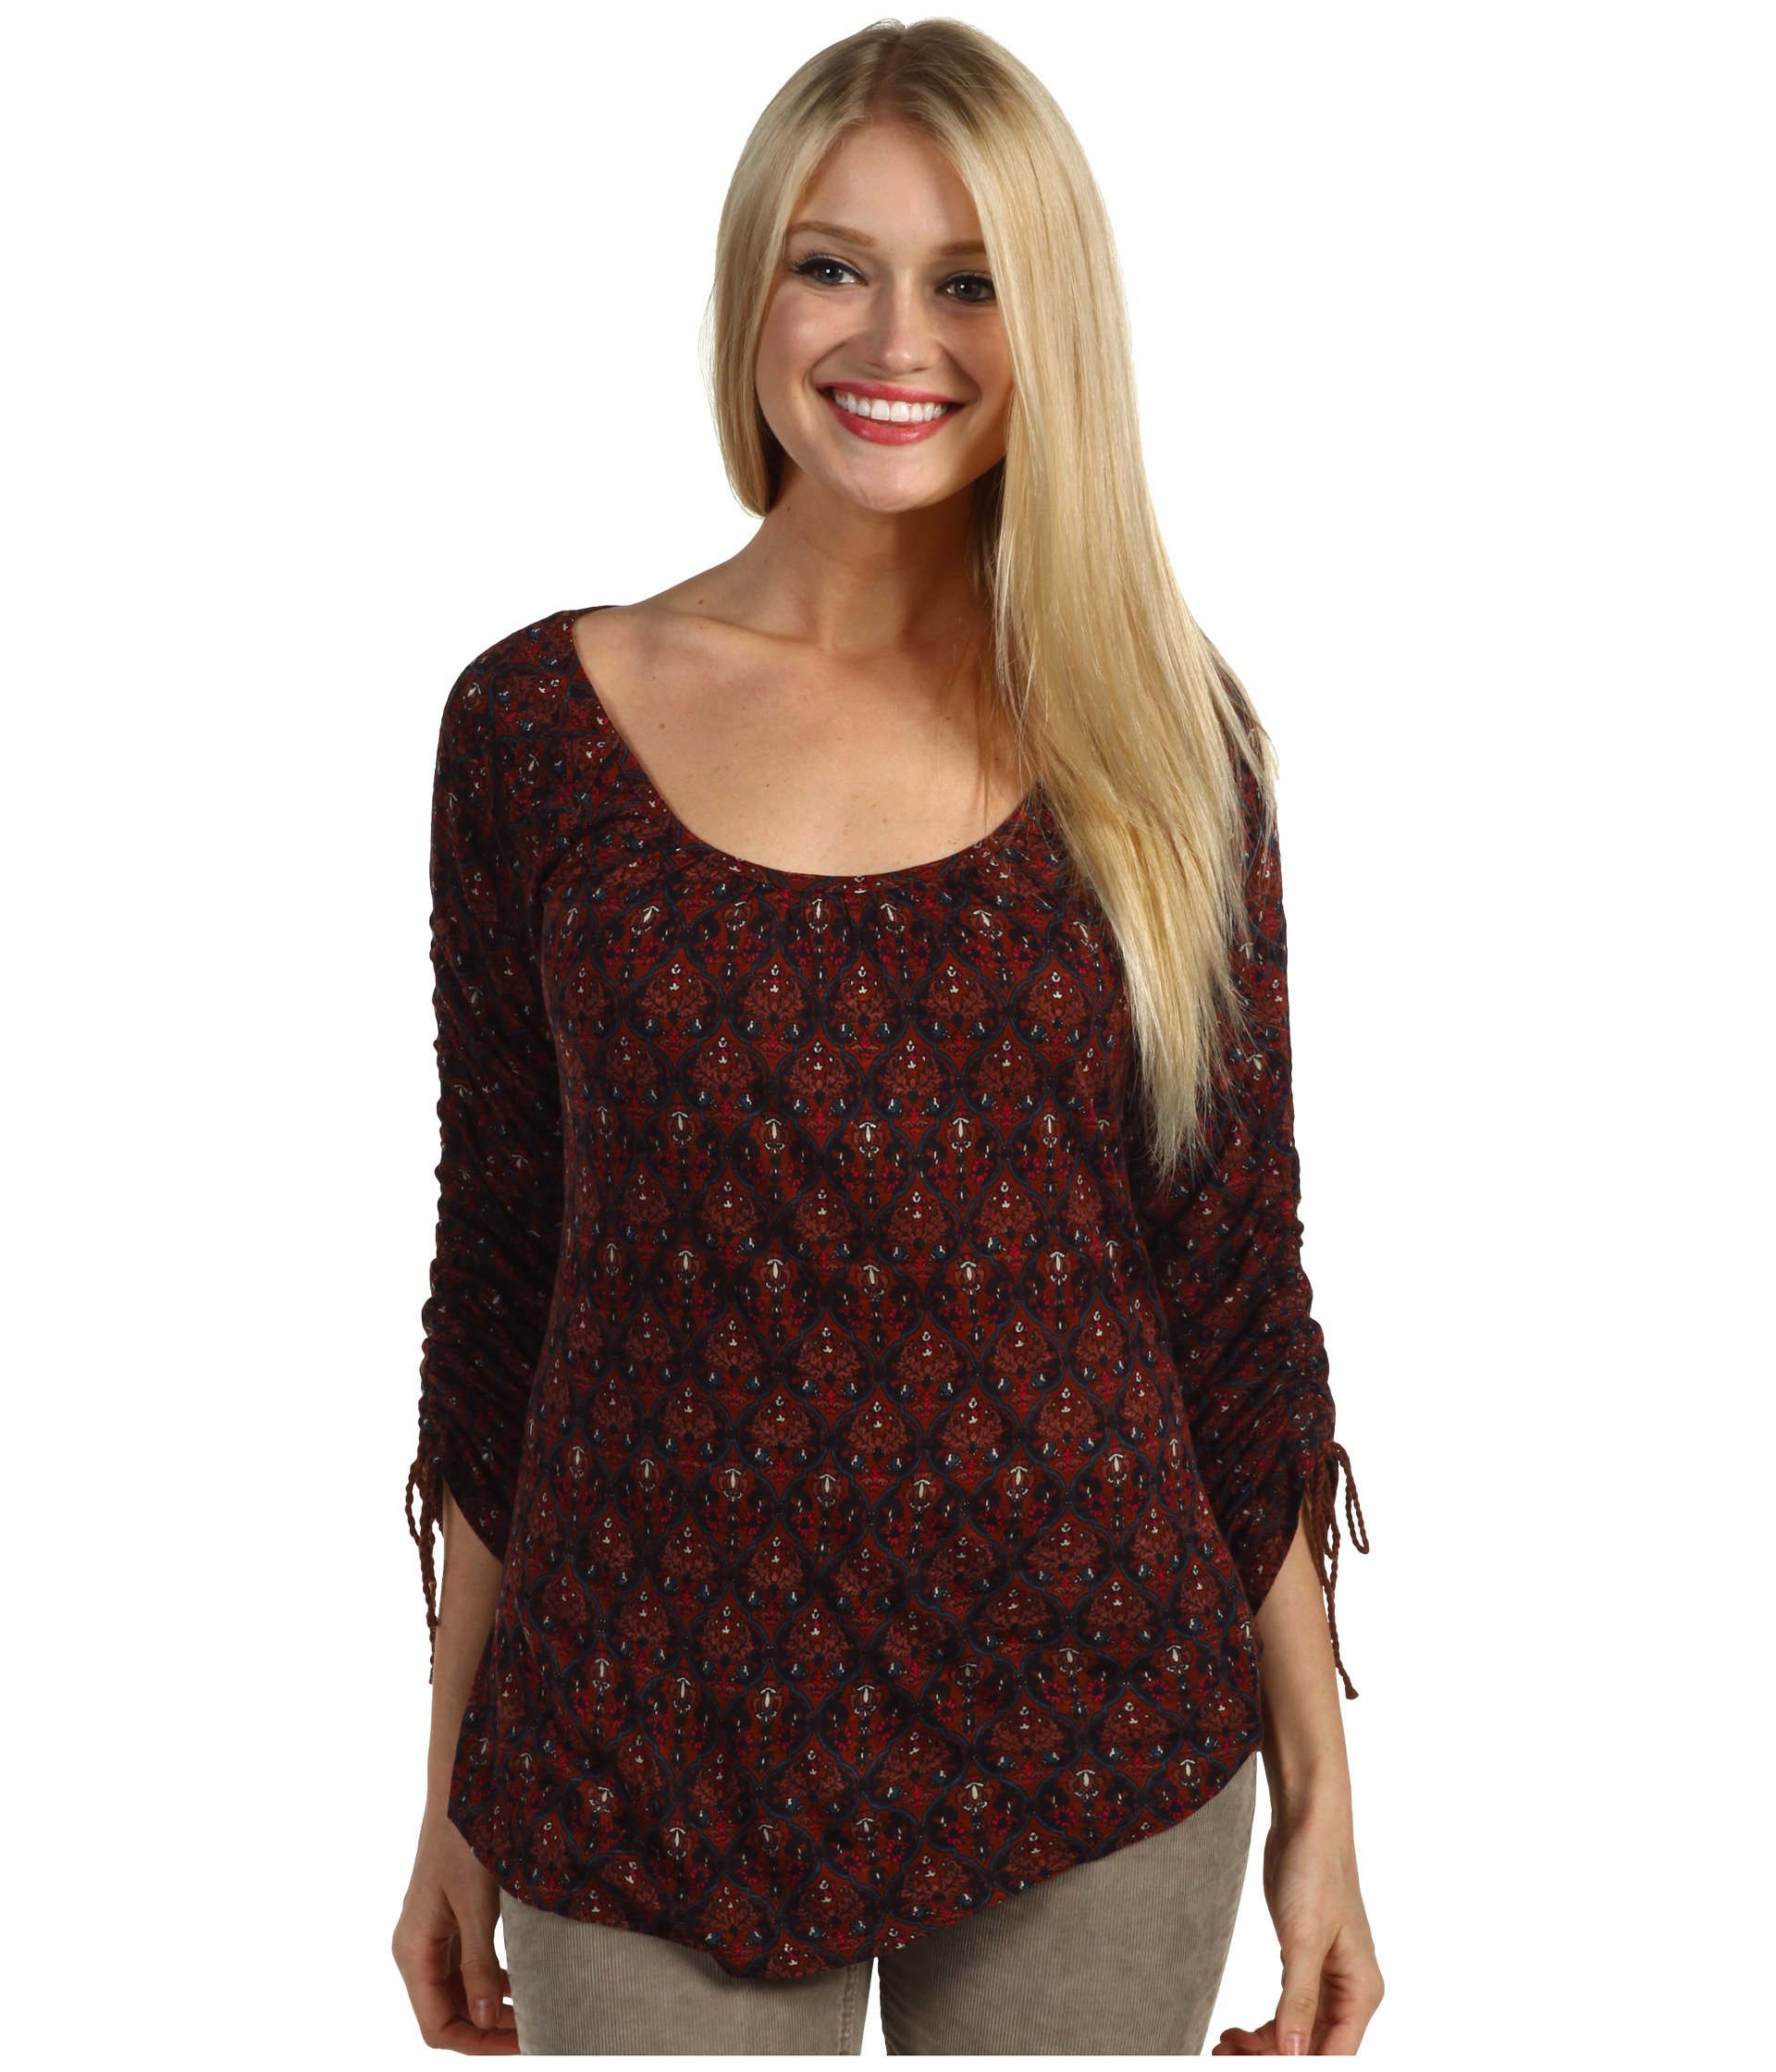 Lucky Brand Wallpaper Arches Brianne Top $47.99 $59.50 SALE